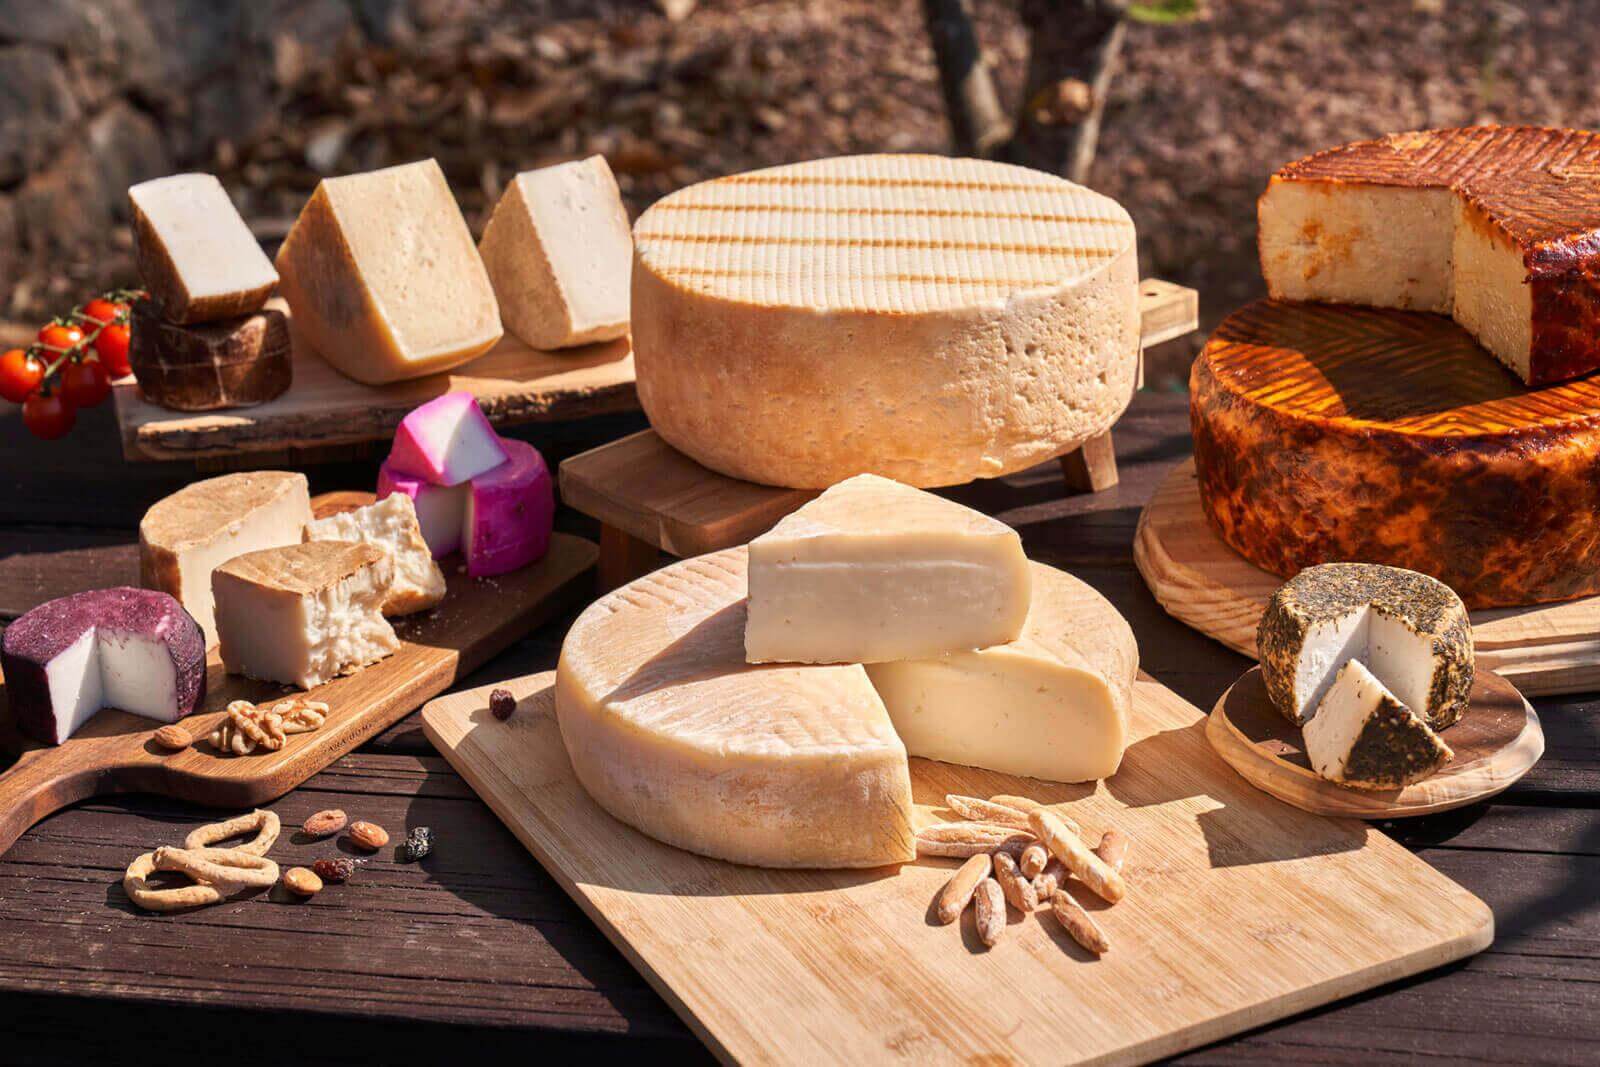 Les fromages canariens